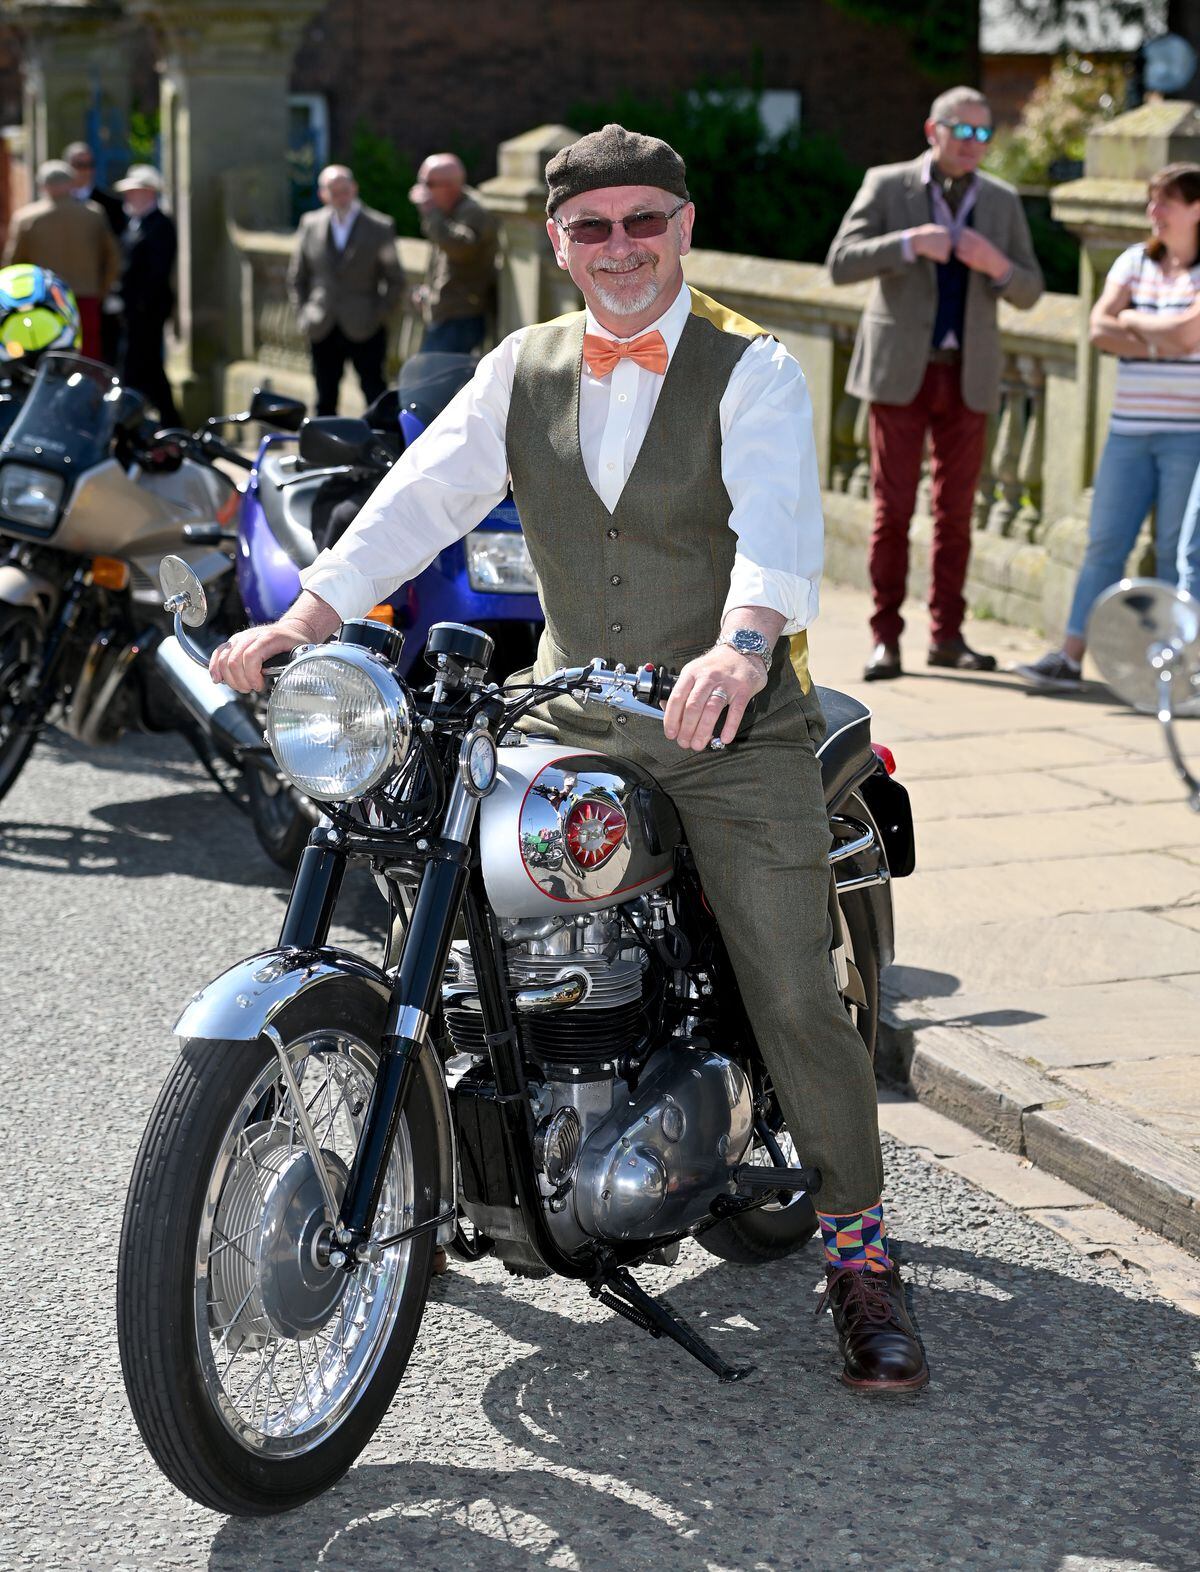 Ken Stoll on his 1957 BSA Super Rocket at the annual Distinguished Gentleman's Ride in Shrewsbury